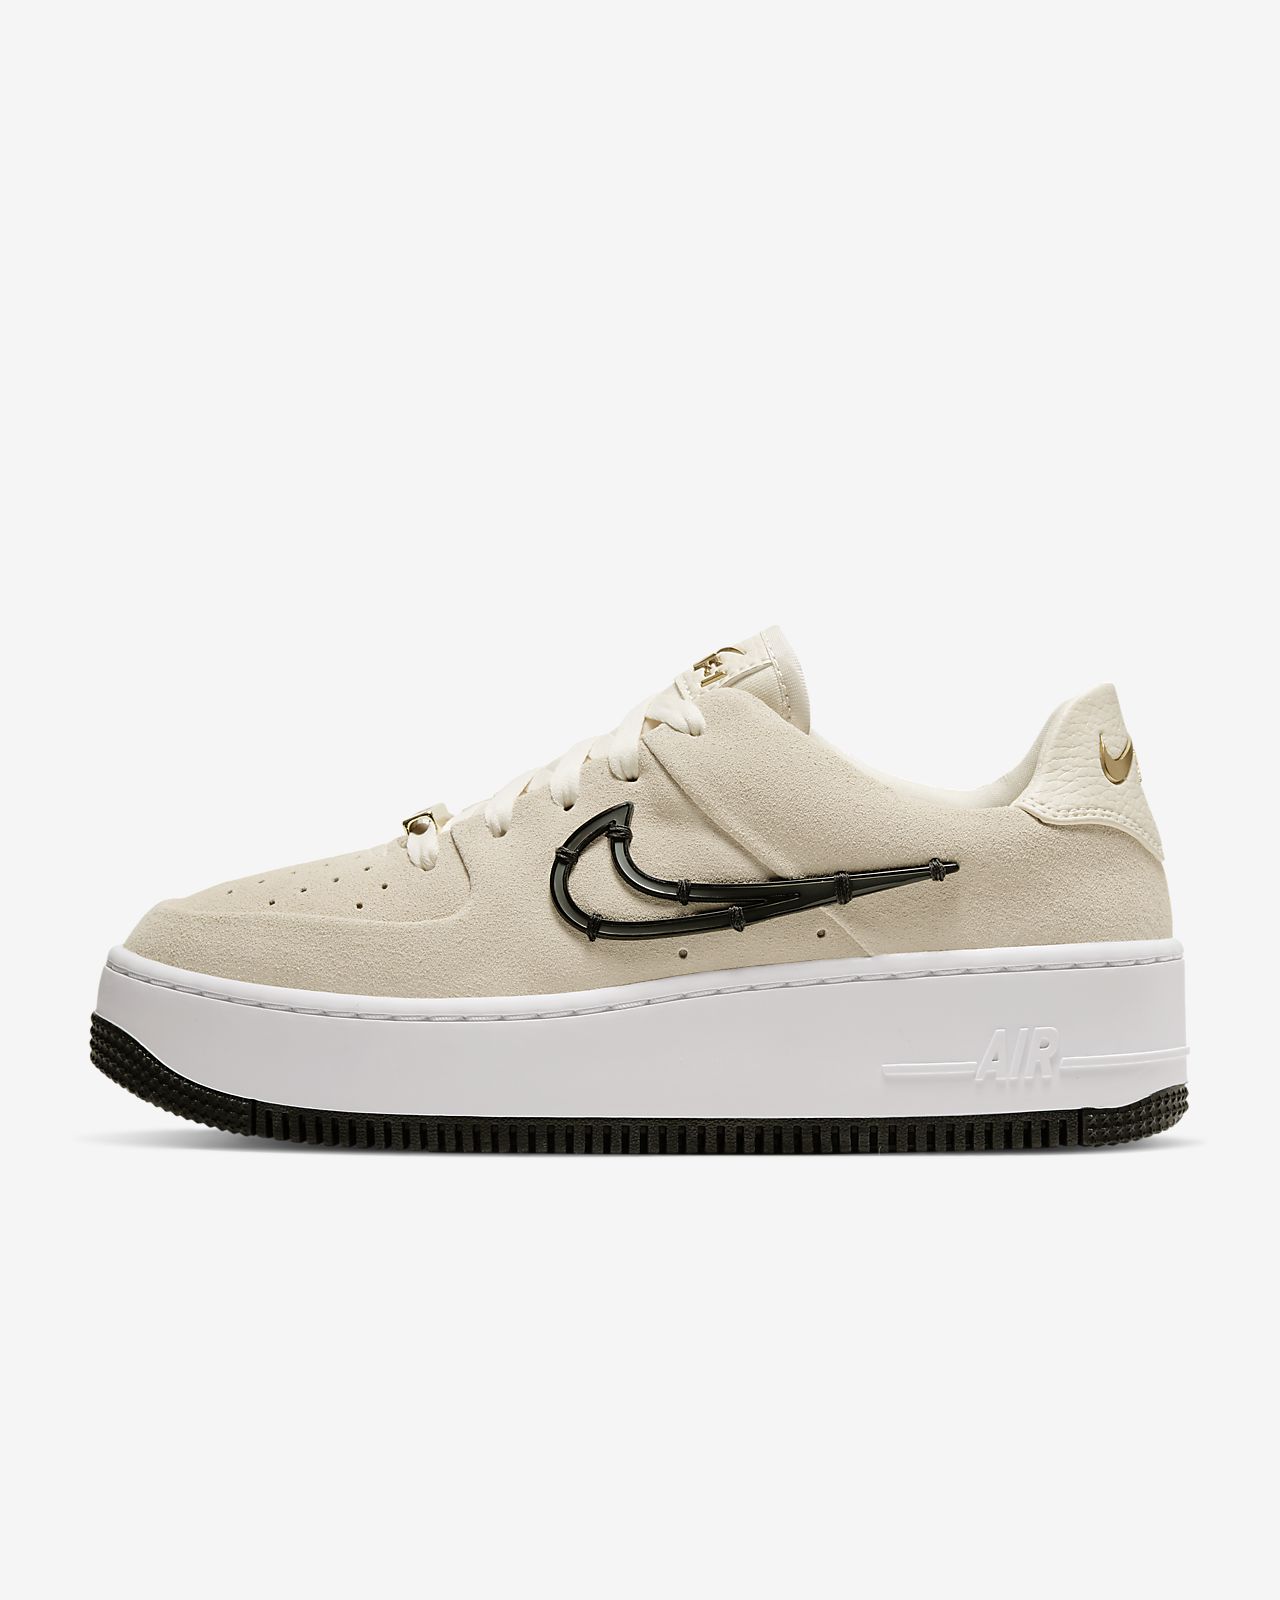 cream colored air force ones